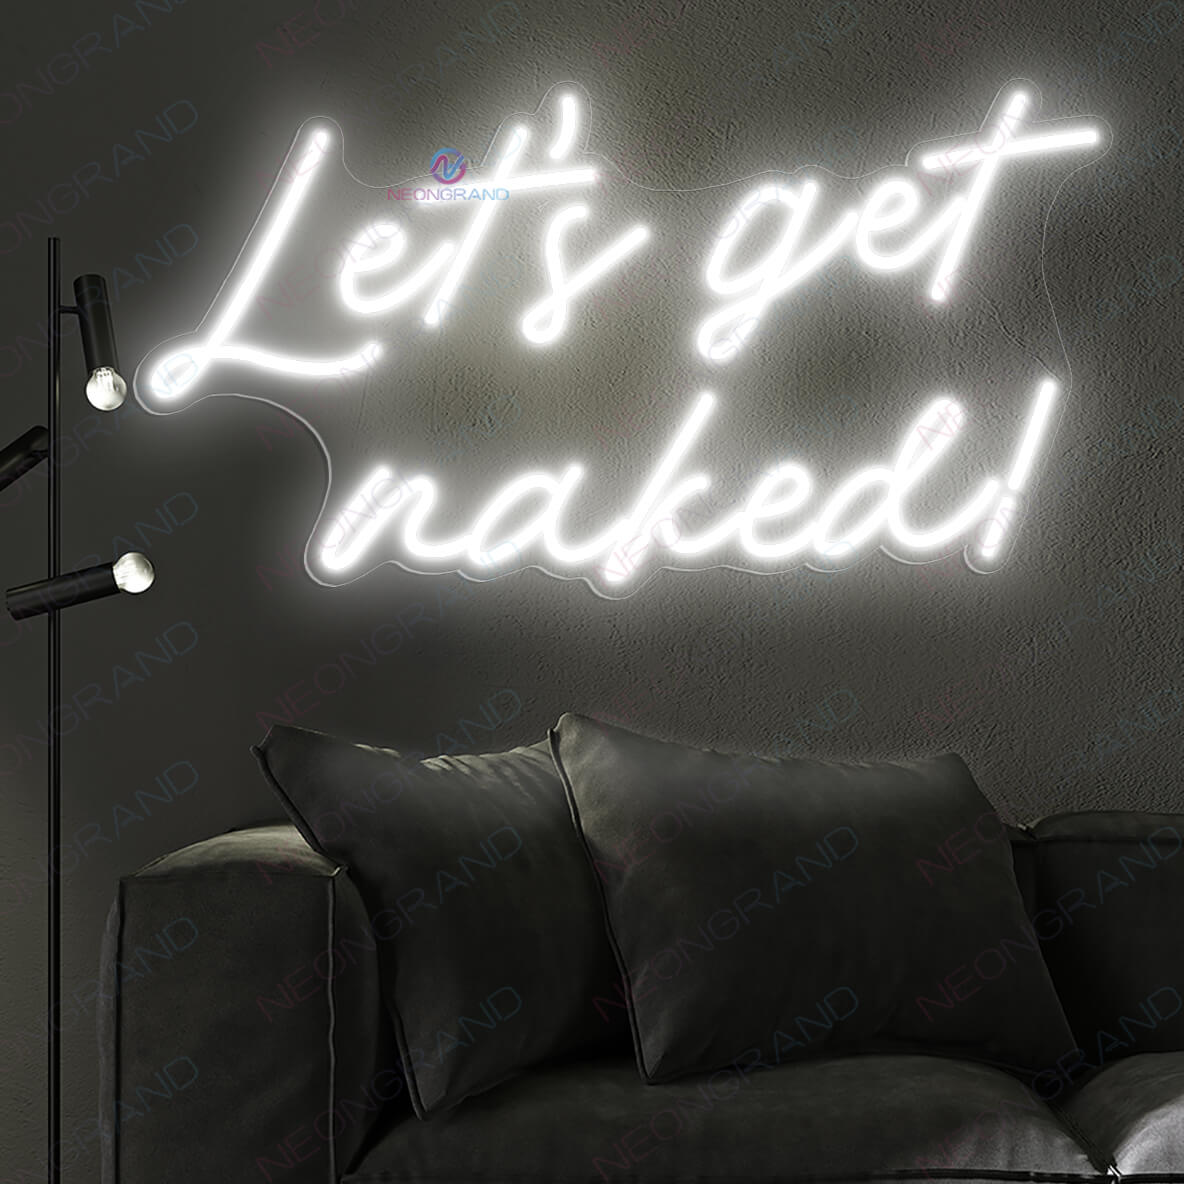 Let's Get Naked Neon Sign Sexy Led Light white